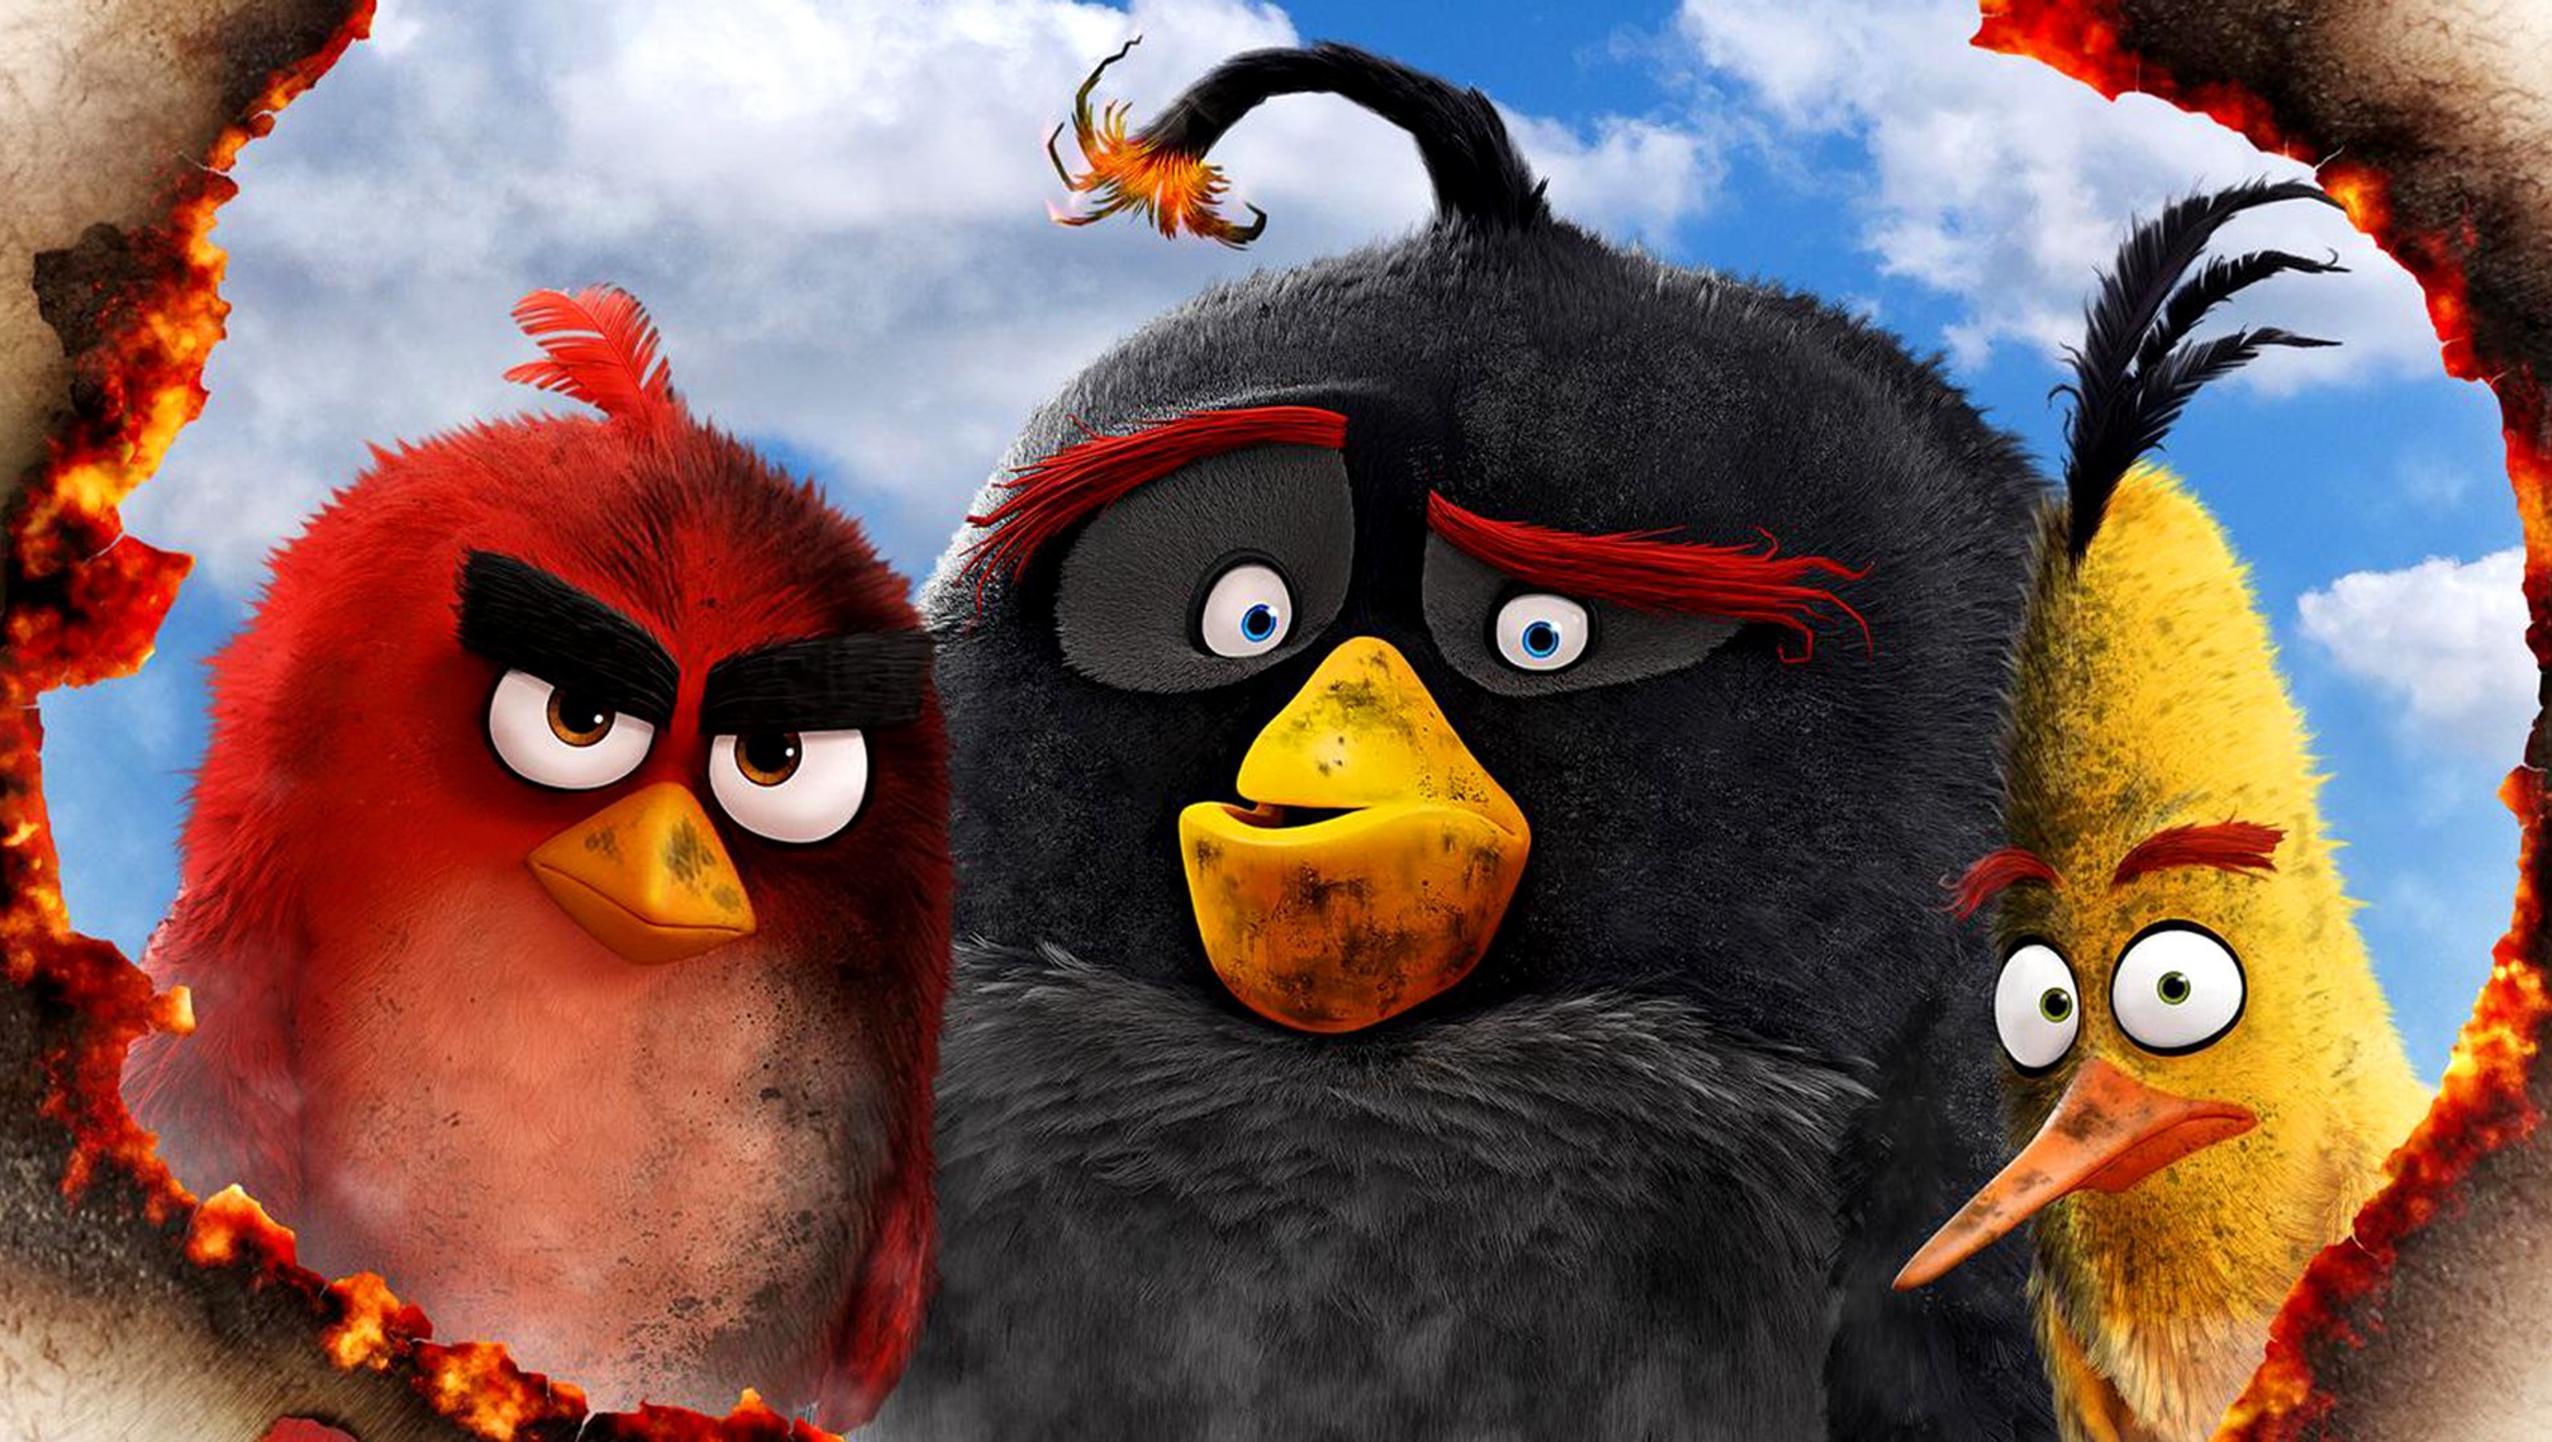 The Angry Birds Movie 2 Wallpaper Free The Angry